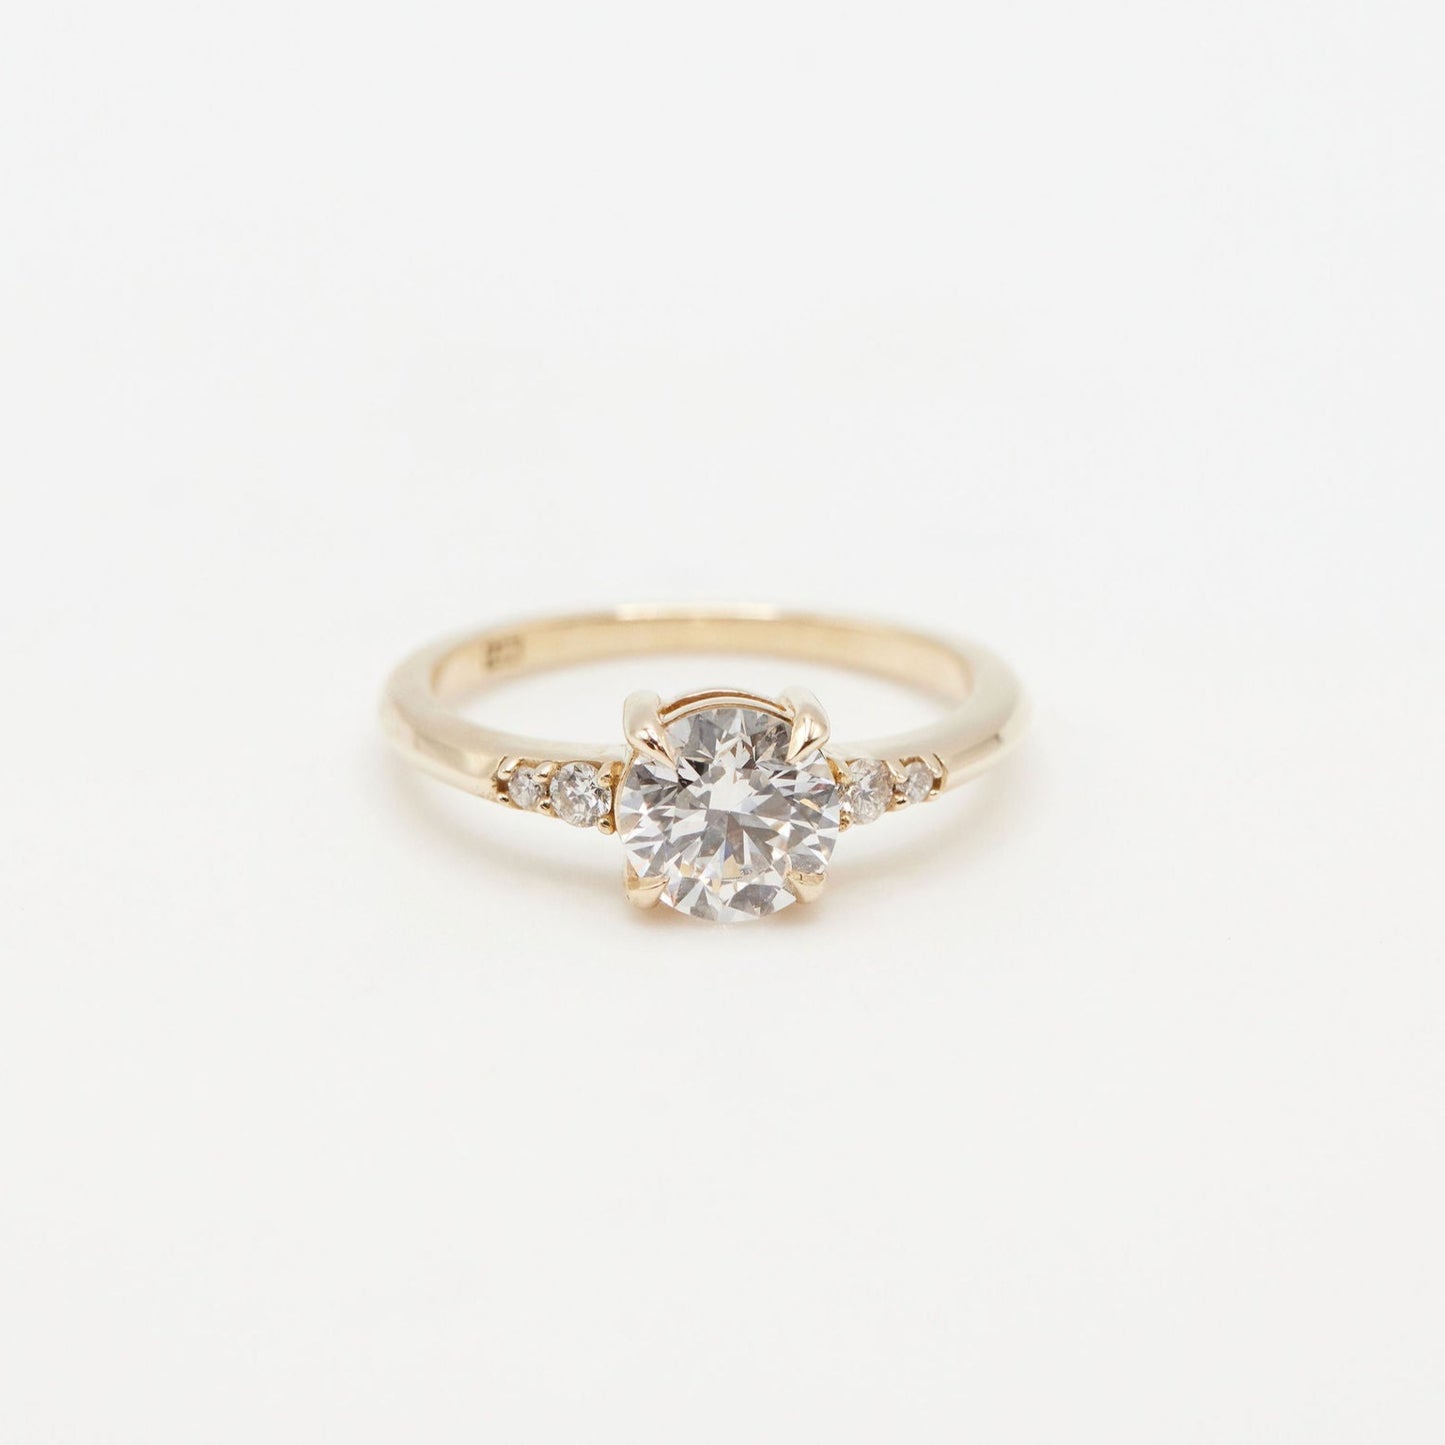 Five stone ring on white background